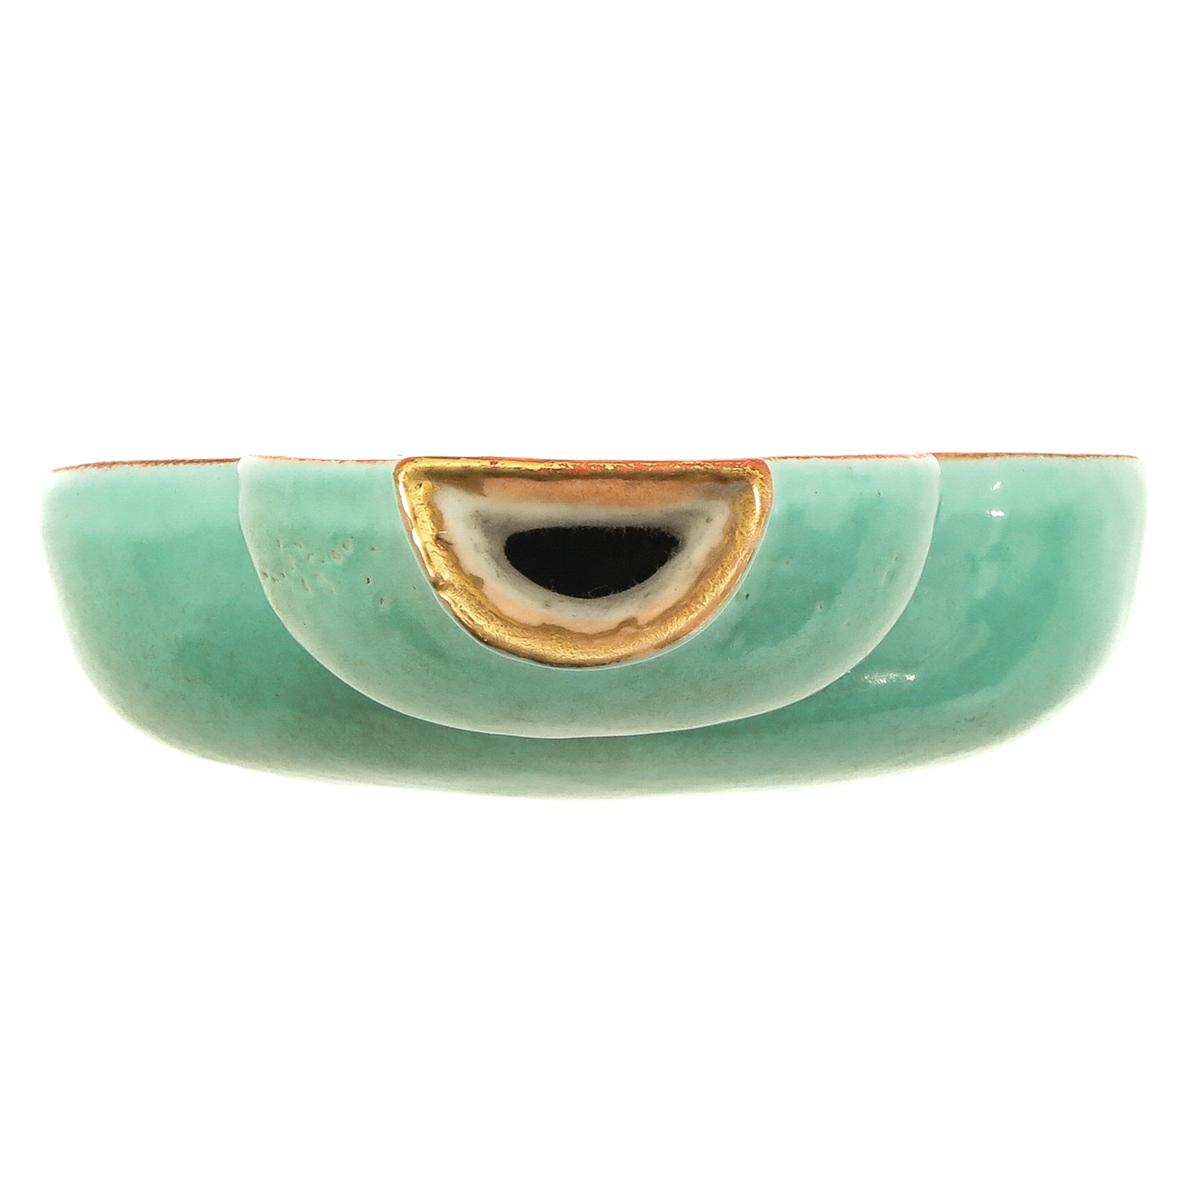 A Green Glaze Wall Vase - Image 5 of 10